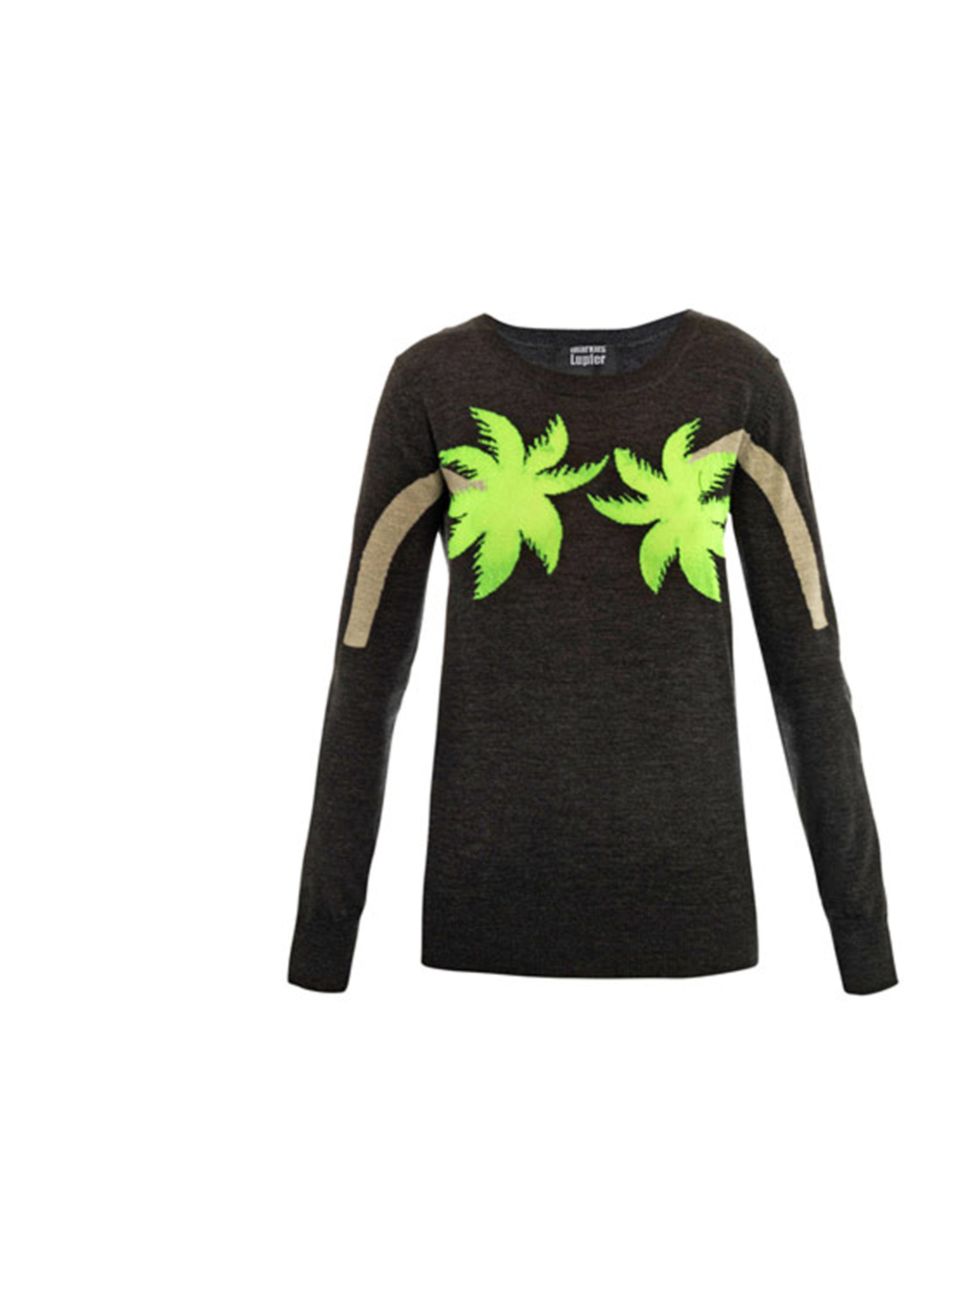 <p>Markus Lupfer neon palm tree jumper, £269, at Matches</p><p><a href="http://shopping.elleuk.com/browse?fts=markus+lupfer+palm+tree">BUY NOW</a></p>